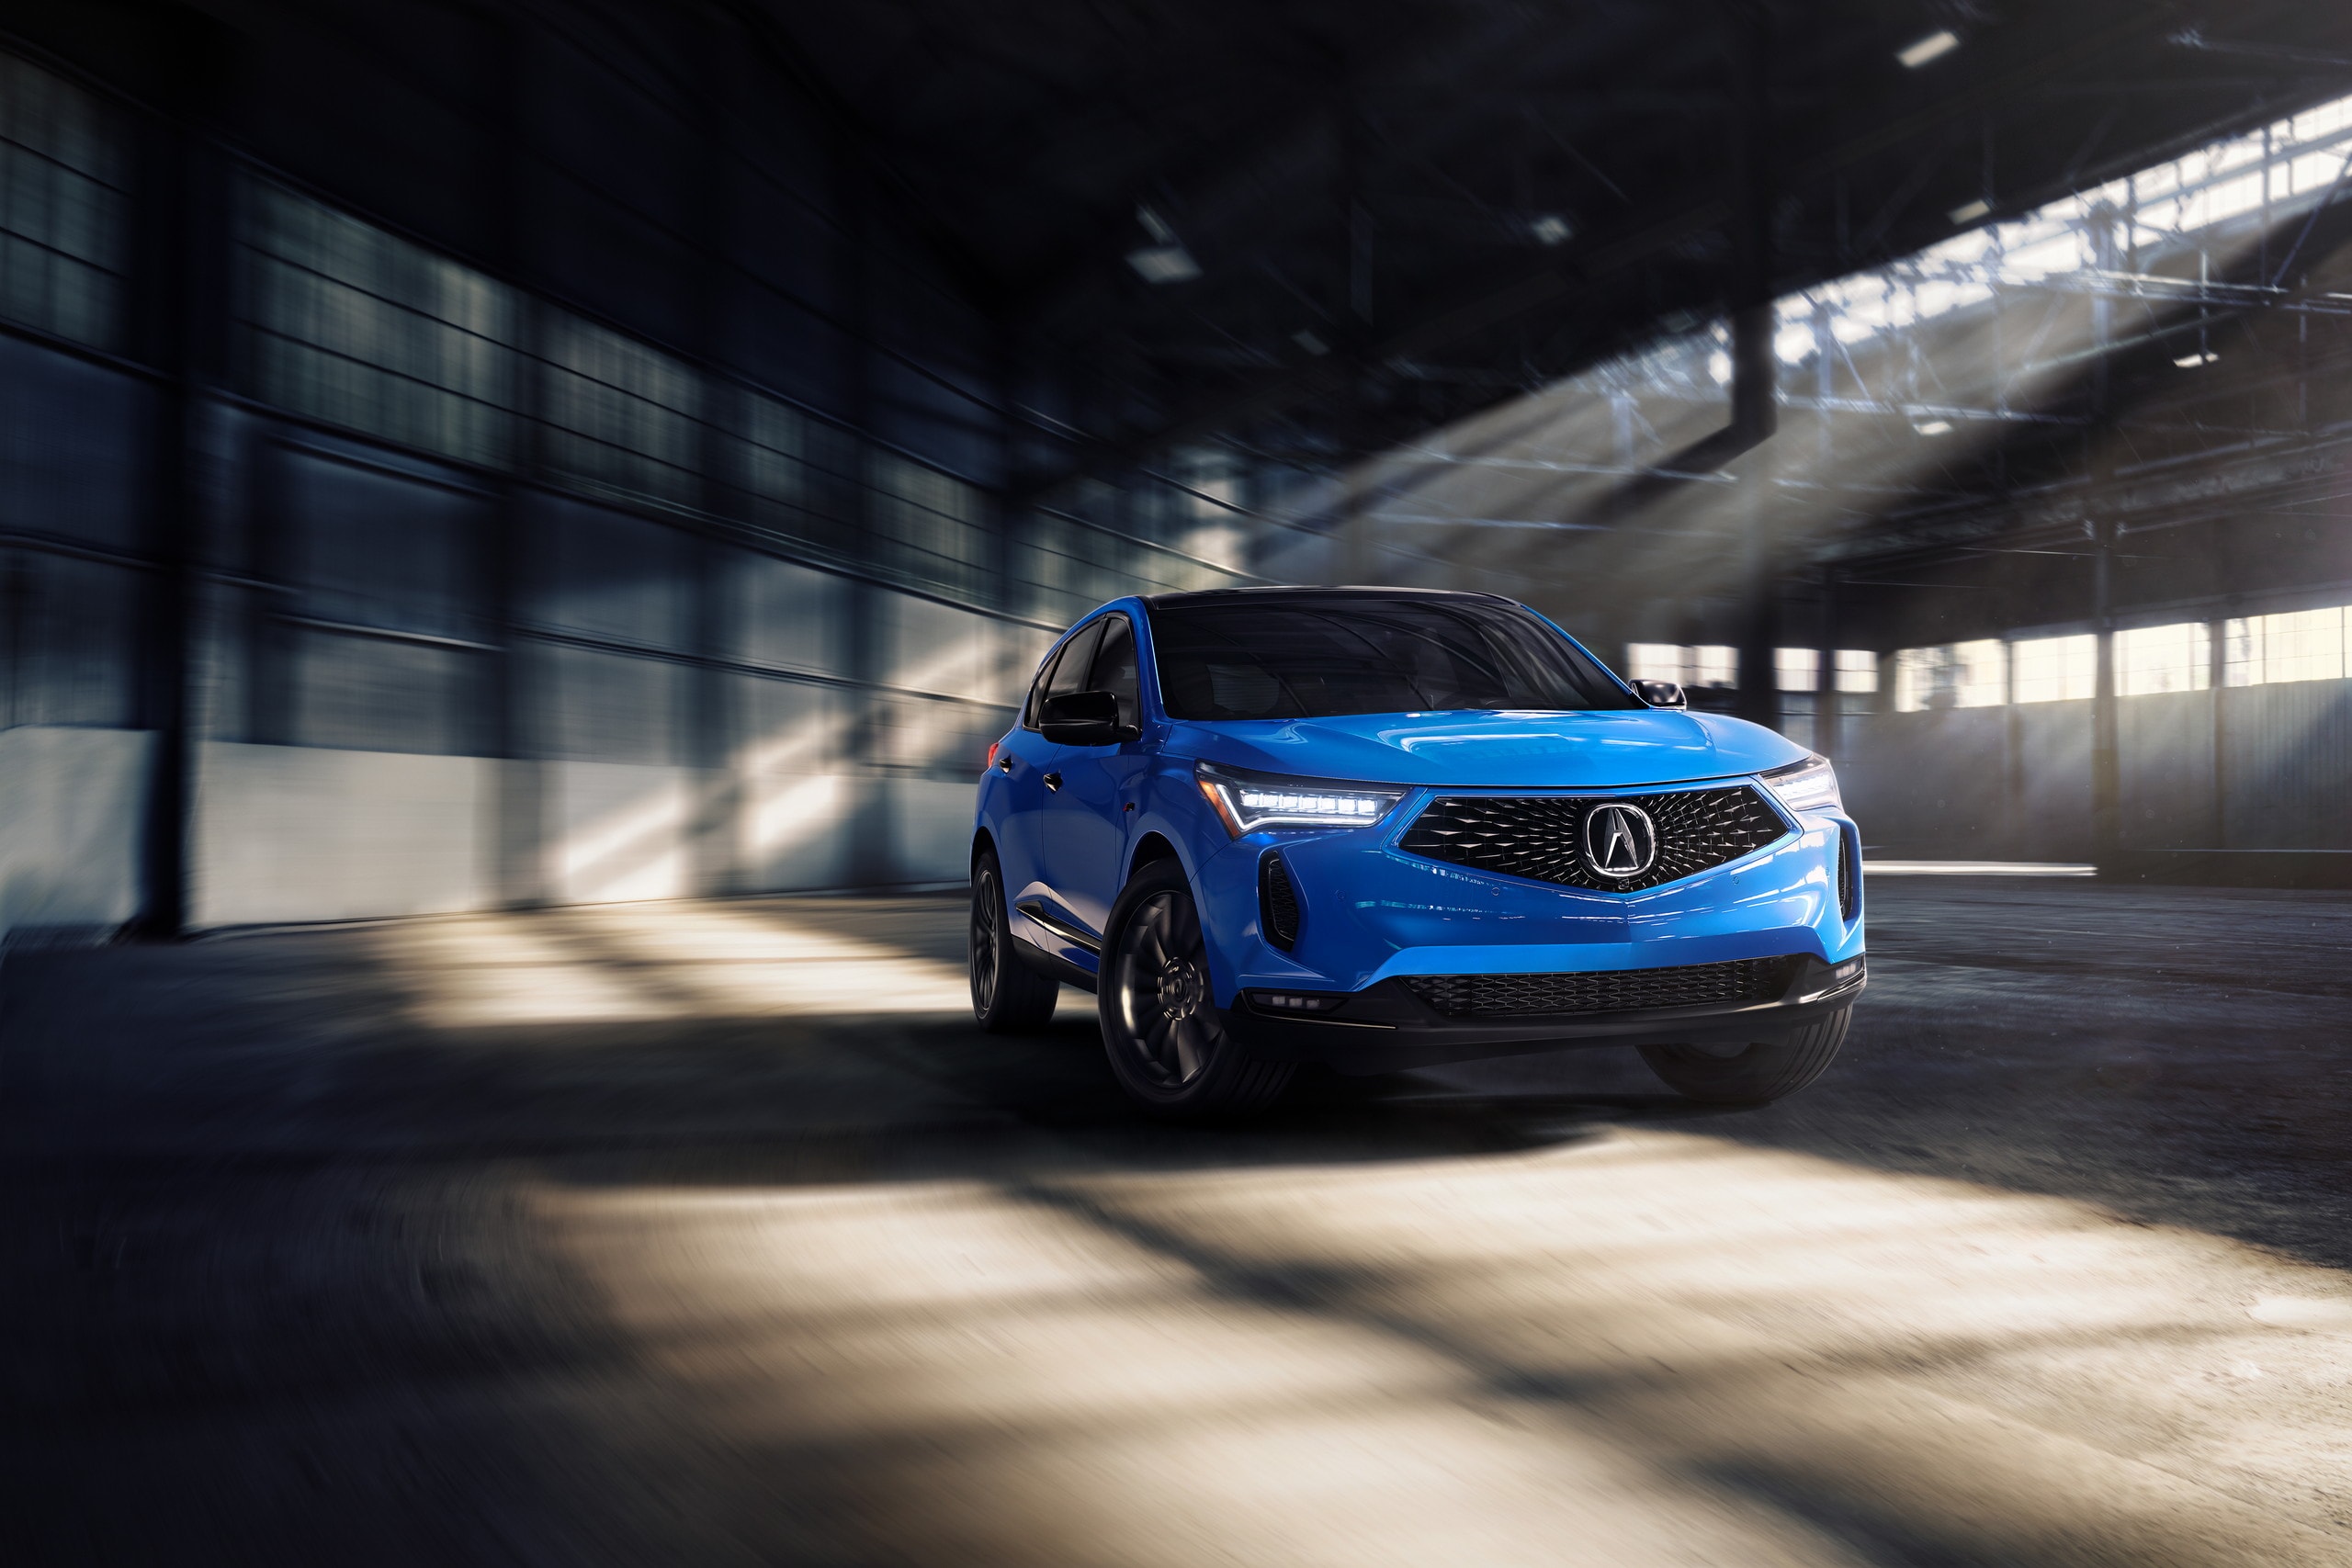 https://s1.cdn.autoevolution.com/images/news/acura-posts-pricing-option-package-changes-and-availability-info-for-the-2022-rdx-171842_1.jpg